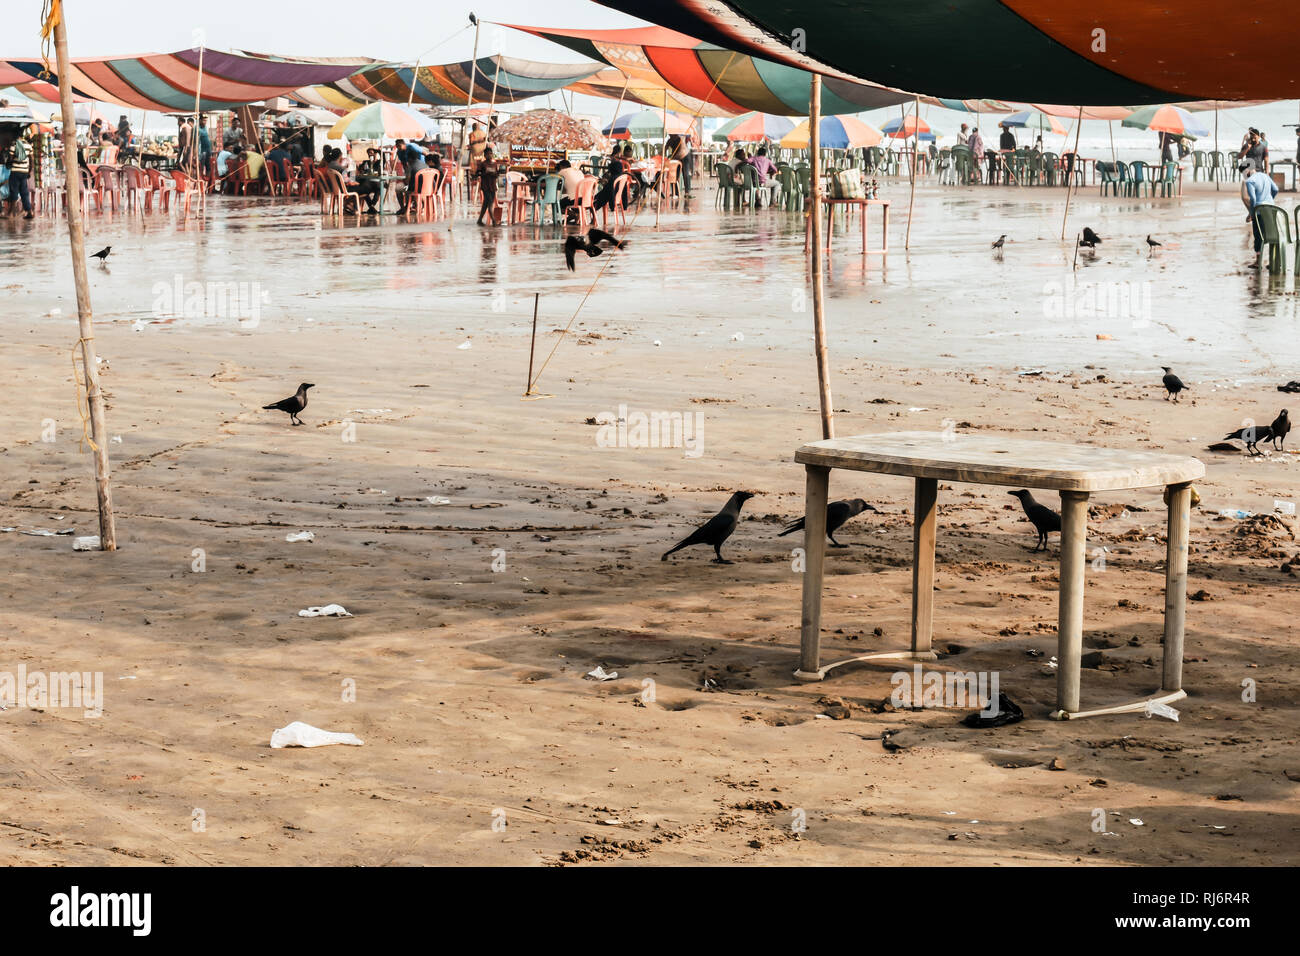 Mandarmani, West Bengal, India 10, Jan 2019: Beach market crowded with tourists and vendors in Mandarmani, west Bengal during new year festival, cause Stock Photo